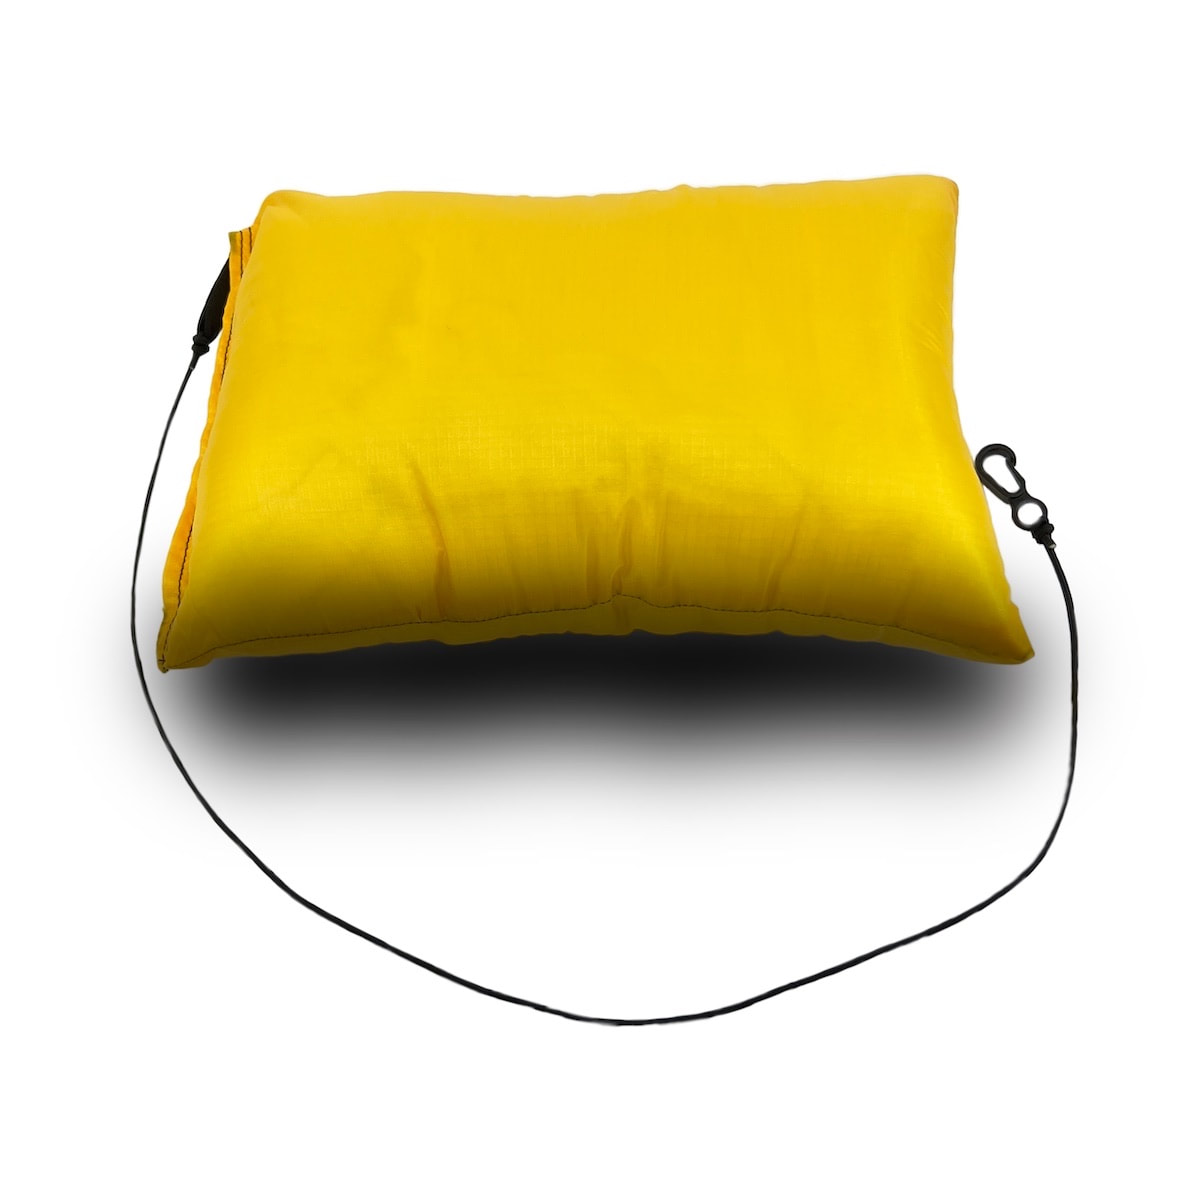 The Cub Pillow is the original hammock camping pillow, invented by ...